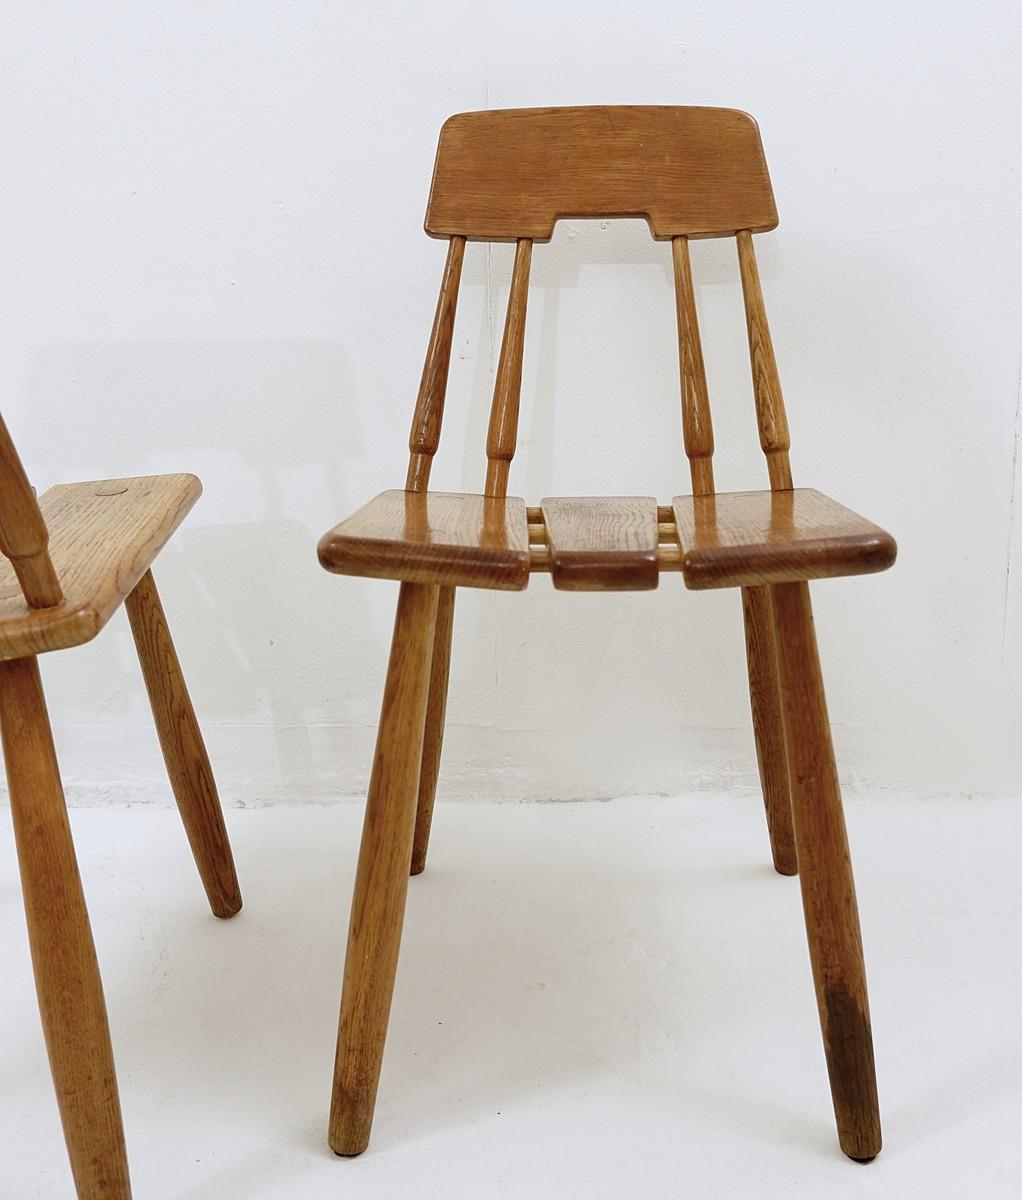 Carl-Gustav Boulogner Chairs in Oak, Produced by Ab Bröderna Wigells Stolfabrik For Sale 2